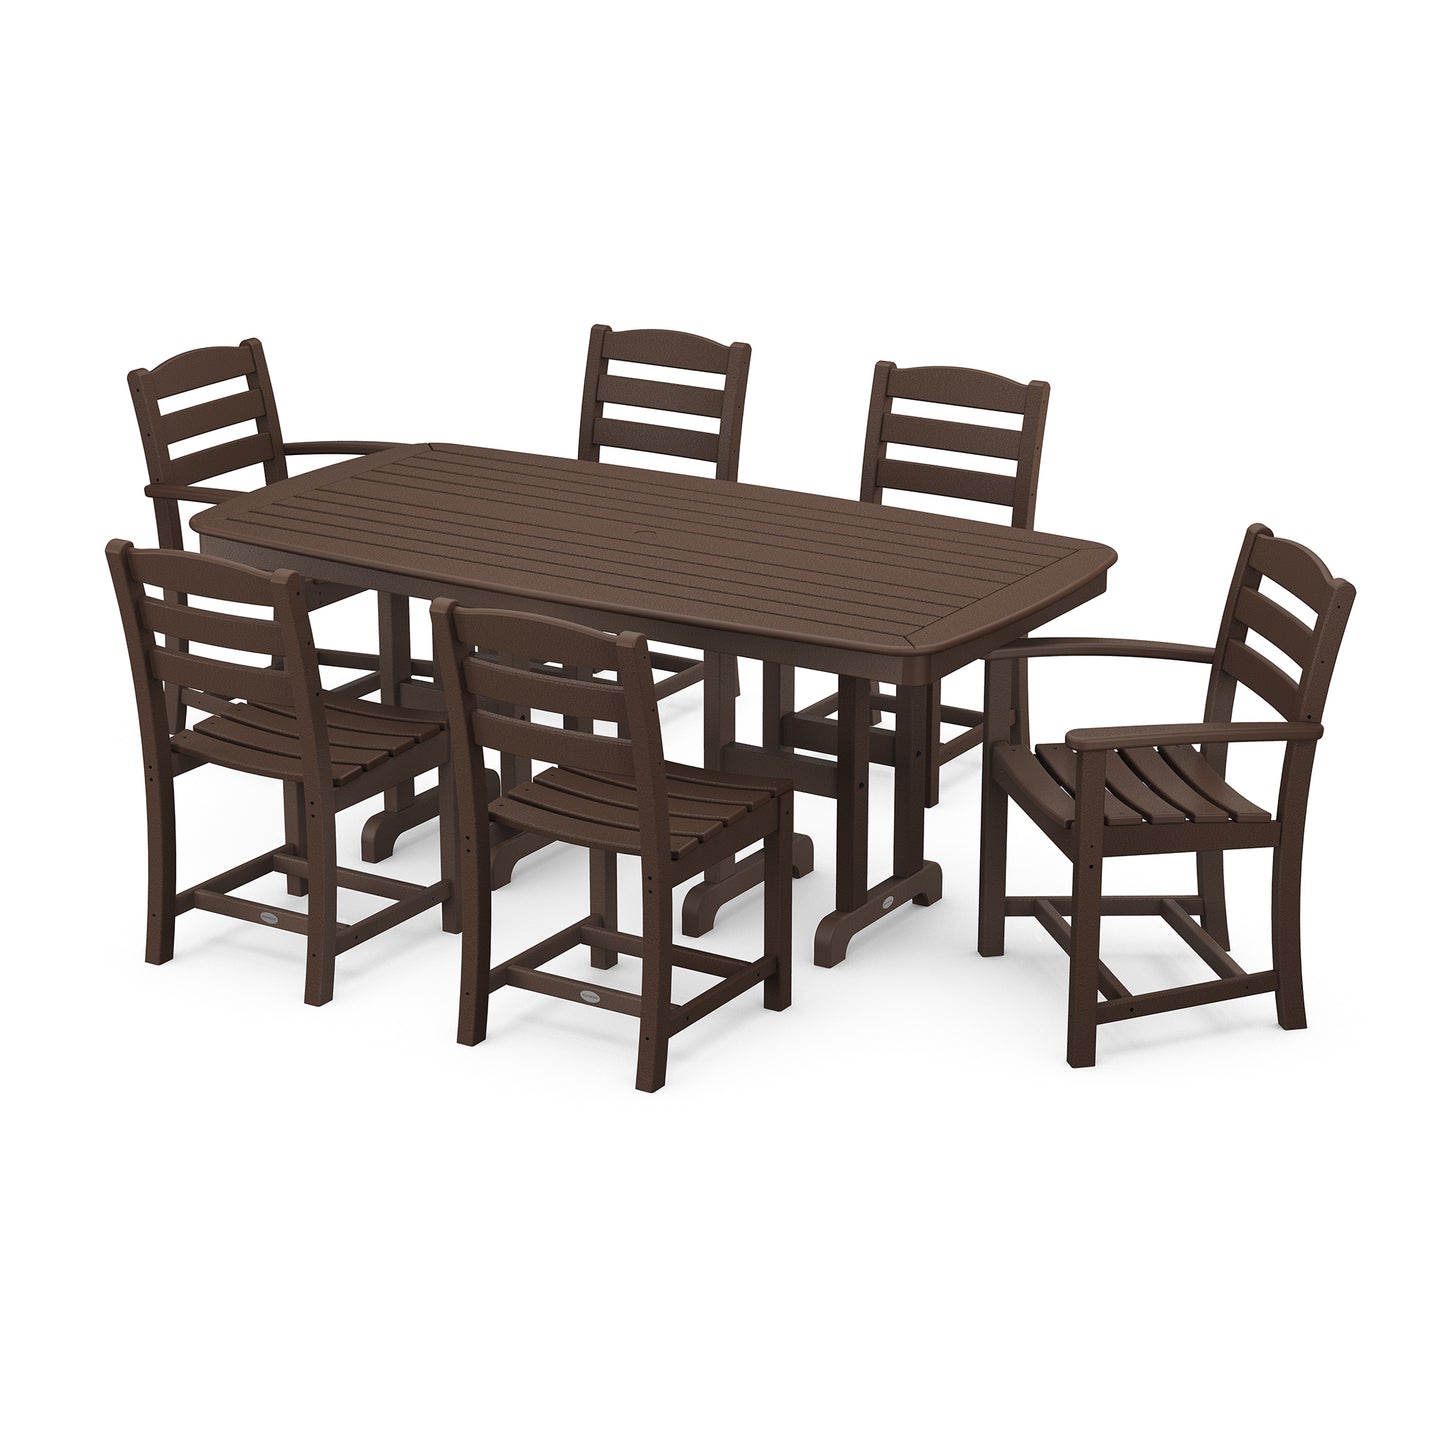 A brown POLYWOOD® La Casa Cafe 7-Piece Dining Set featuring a rectangular table and six matching chairs, all made of fade-resistant colored plastic or polymer resembling wood, on a plain white background.